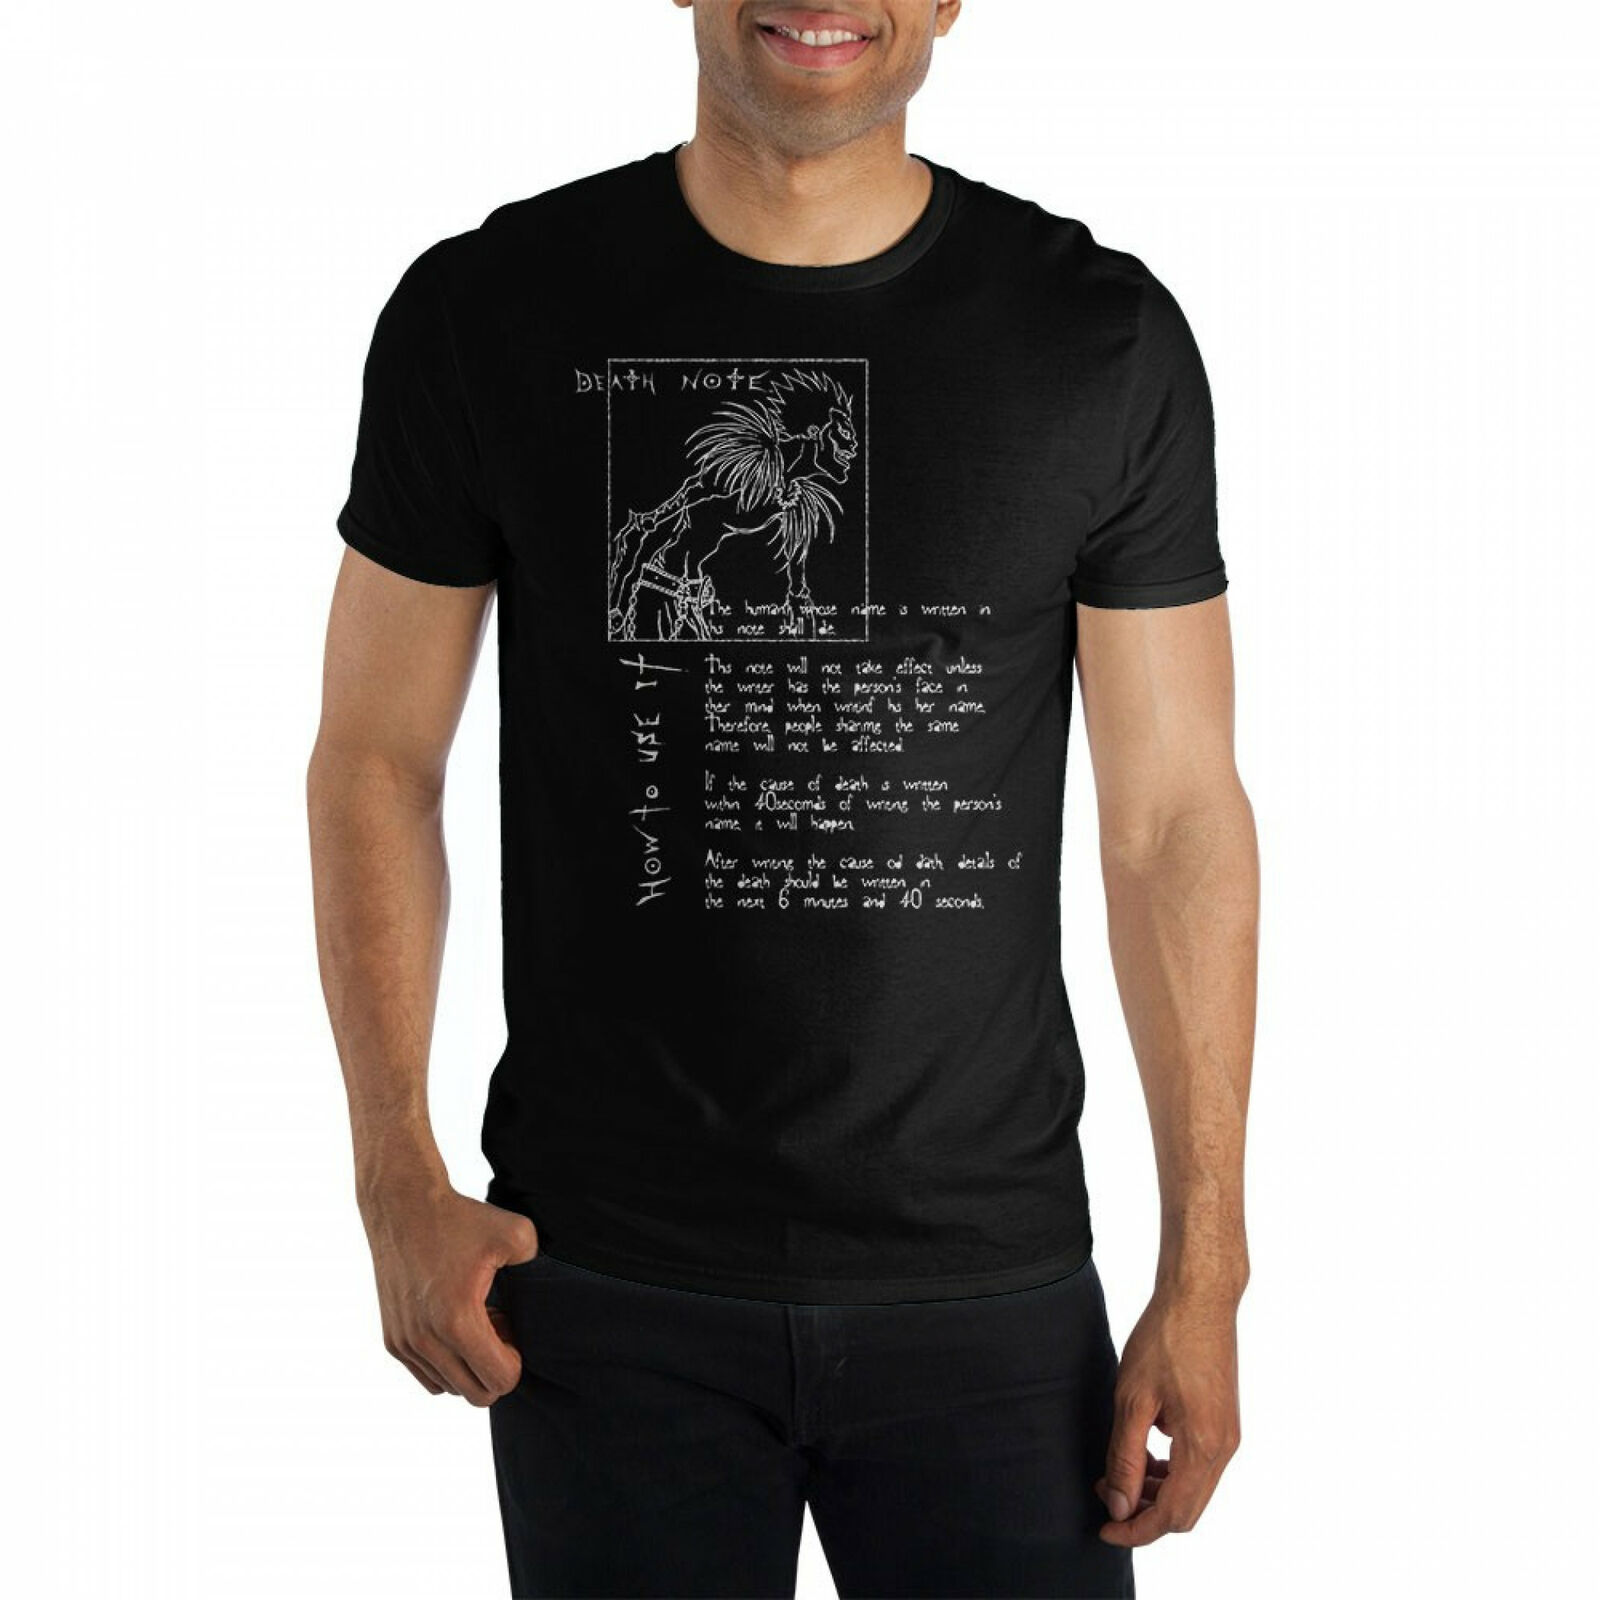 Primary image for Death Note Curse T-Shirt Black